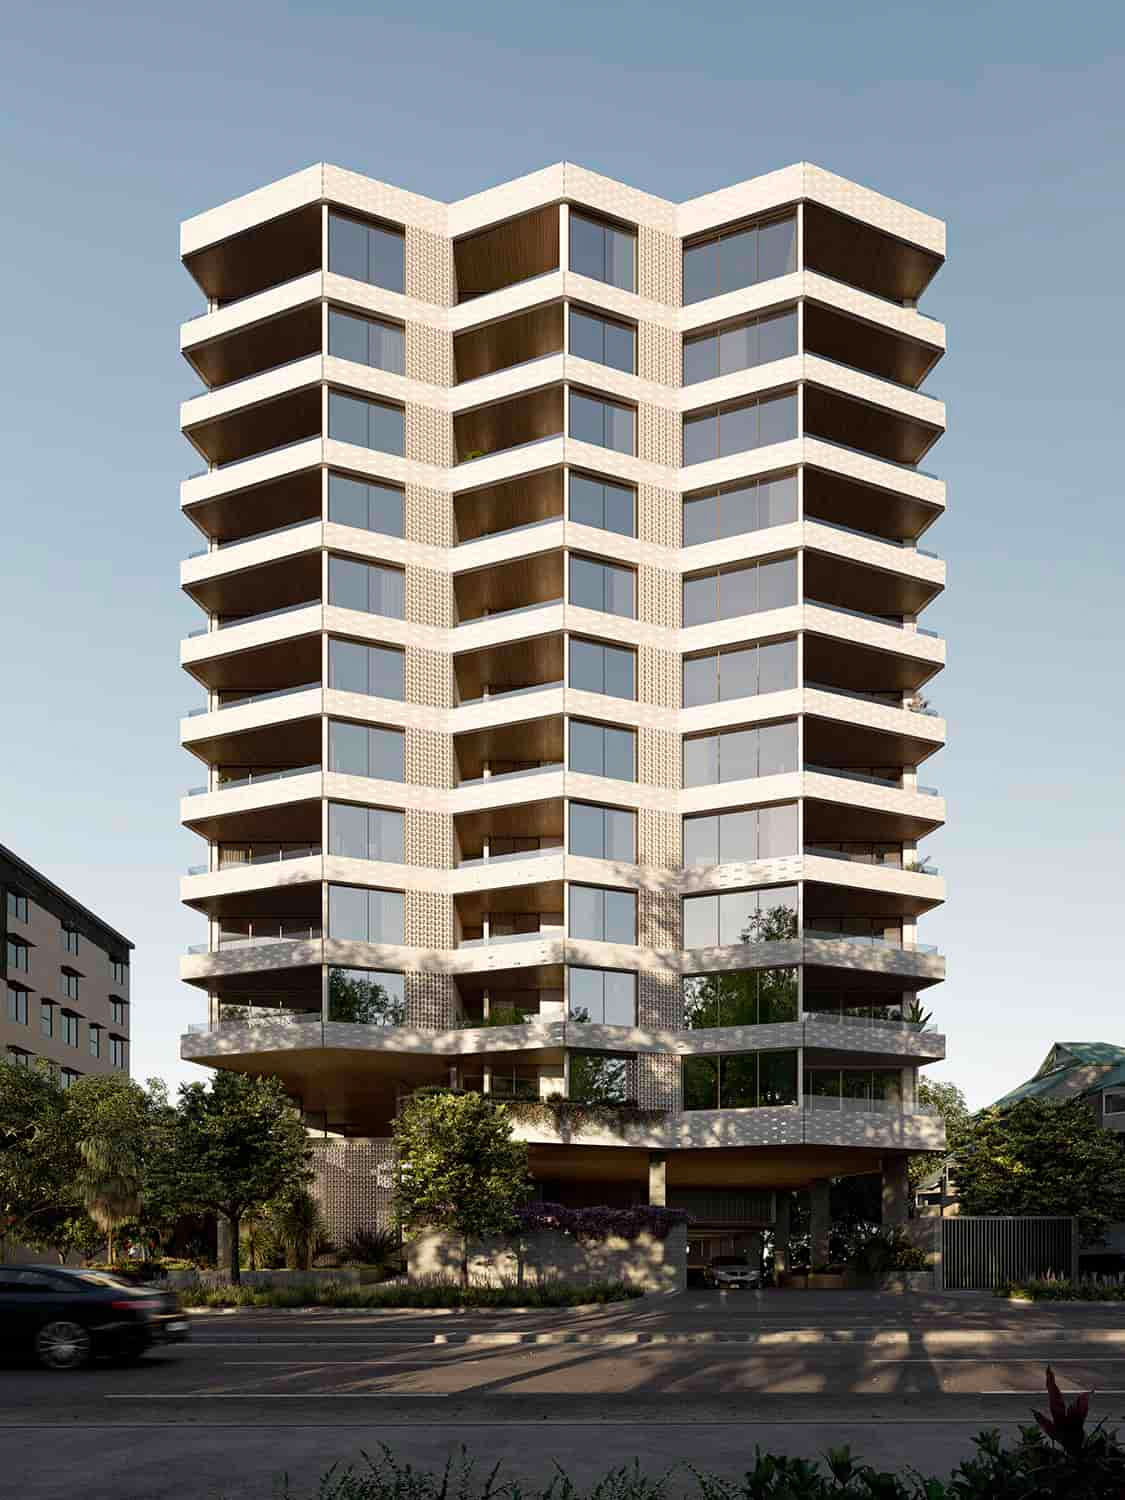 Aria Group's Riviere project, now being built by Aria Group's Riviere Constructions. Source: Aria Group.